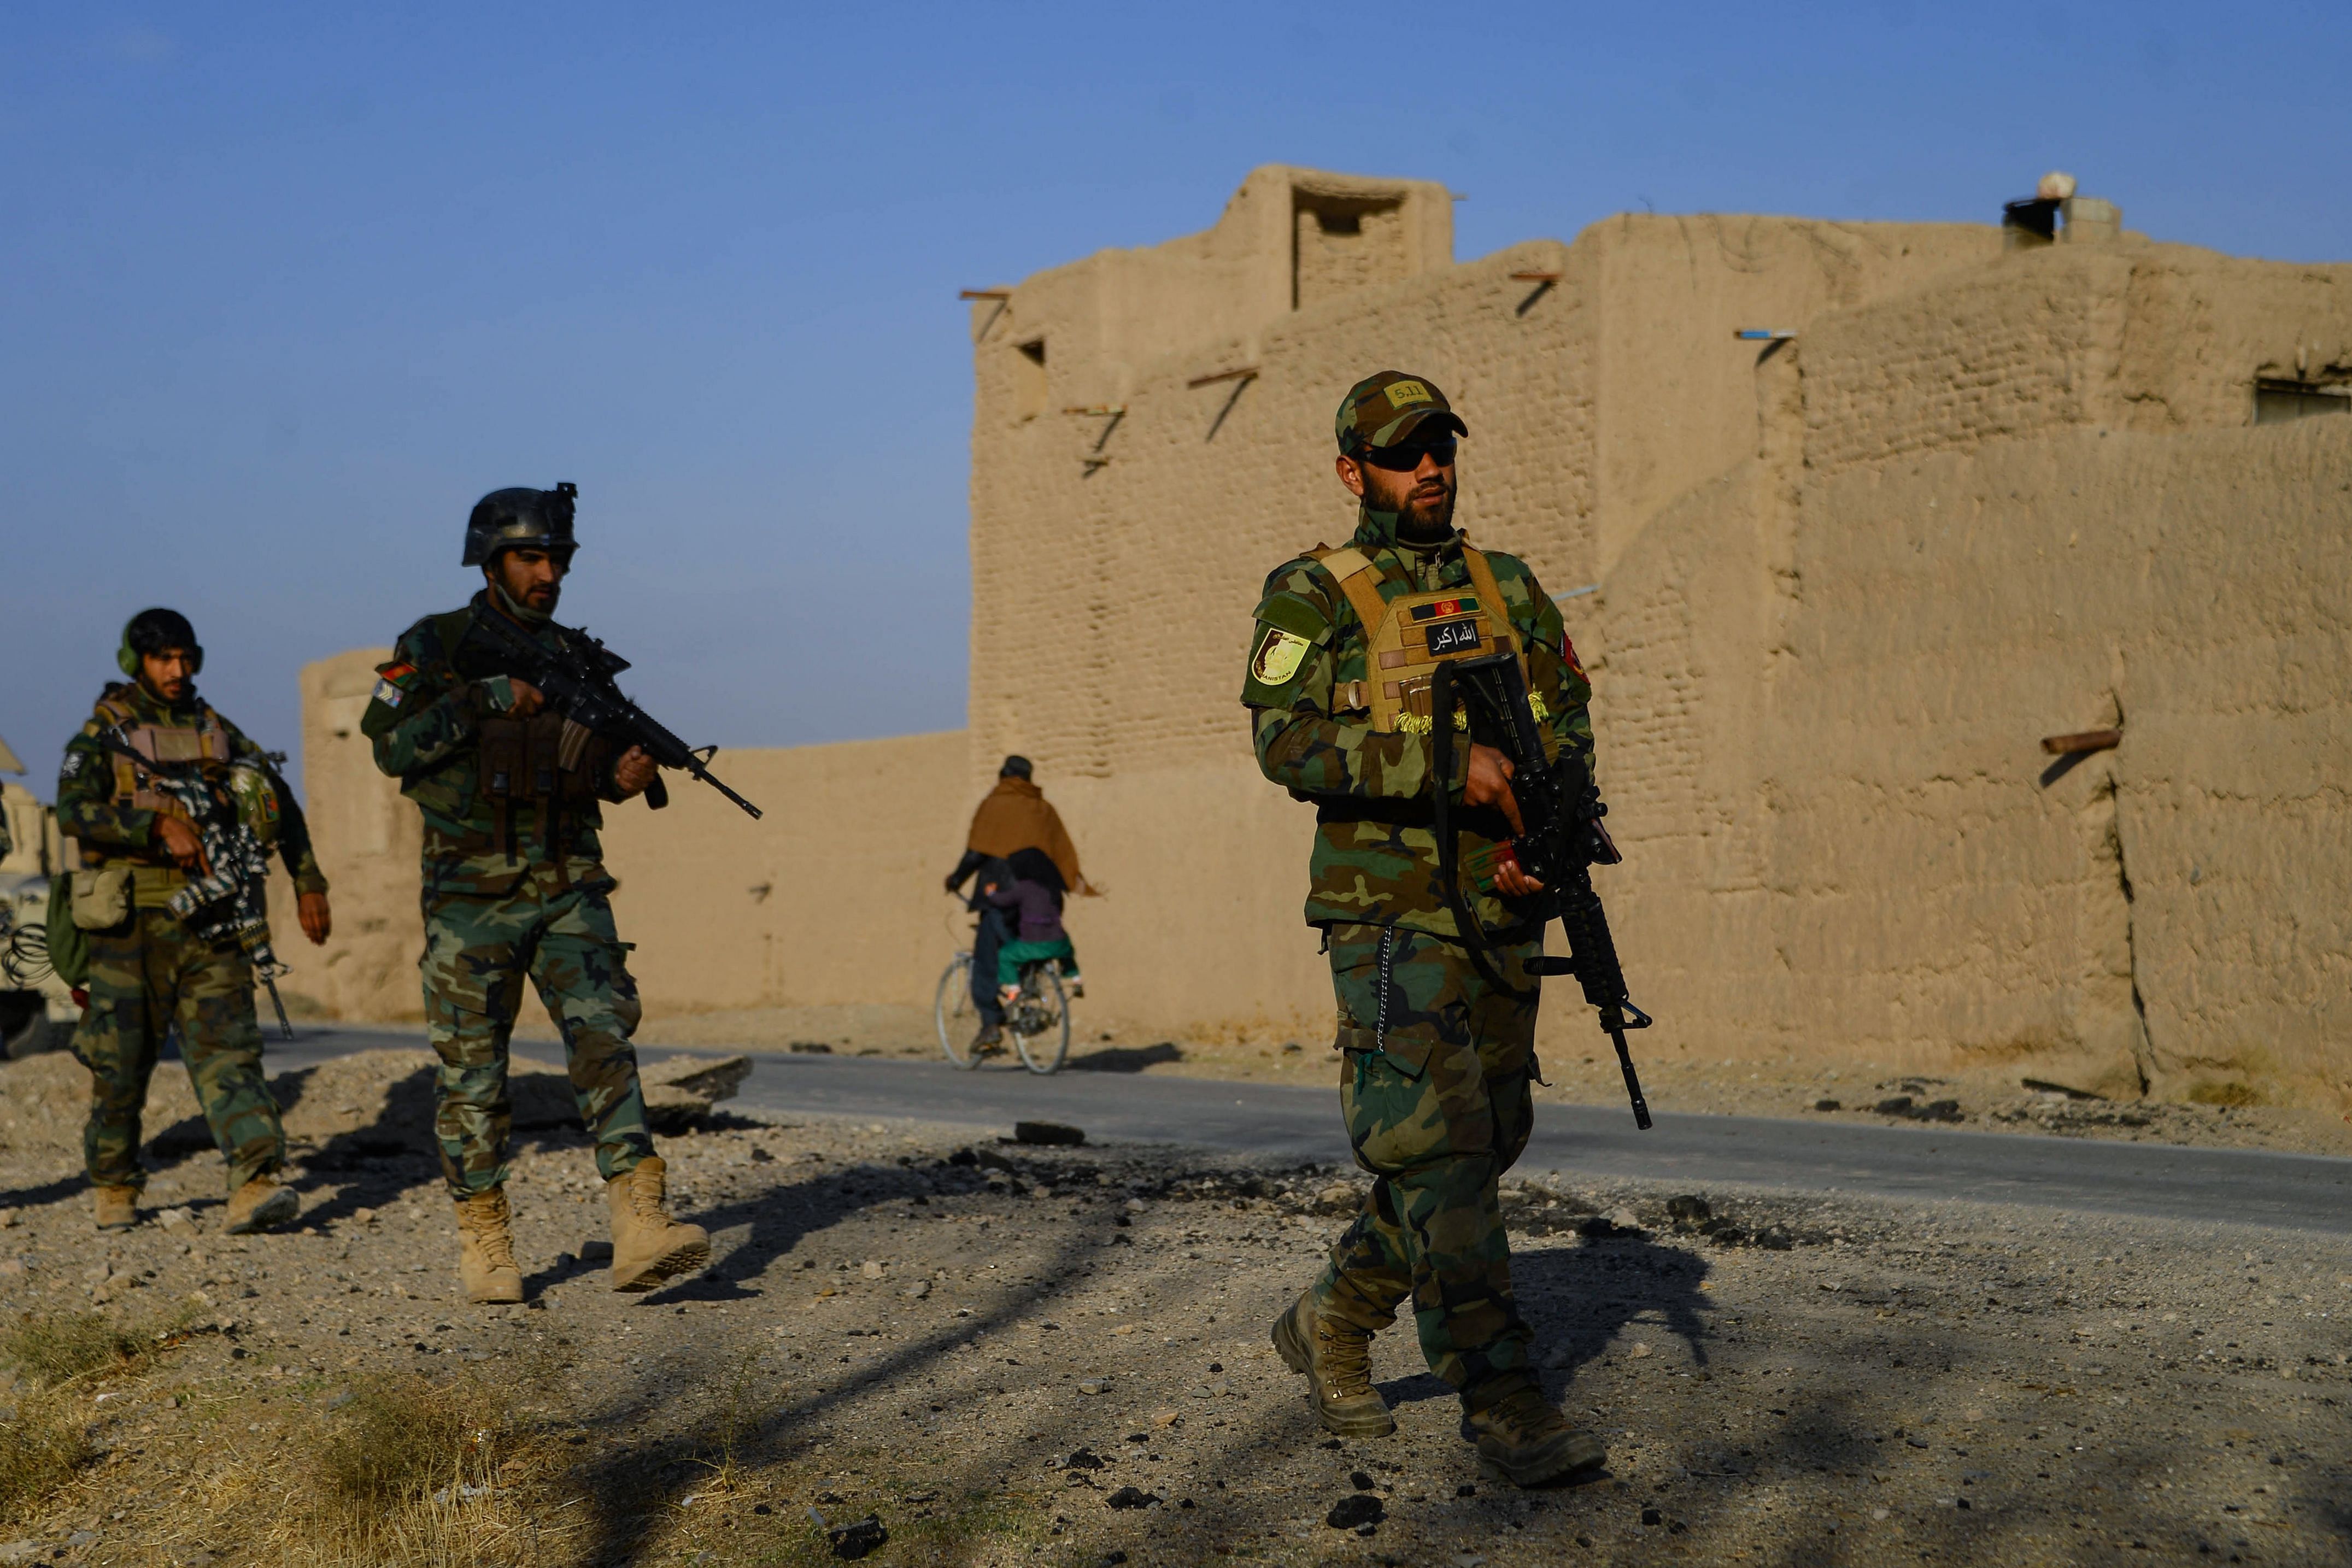 Afghan National Army (ANA) and Afghan Local Police (ALP) forces patrol during a cleaning operation in Pashtun Zarghun district. Credit: AFP Photo